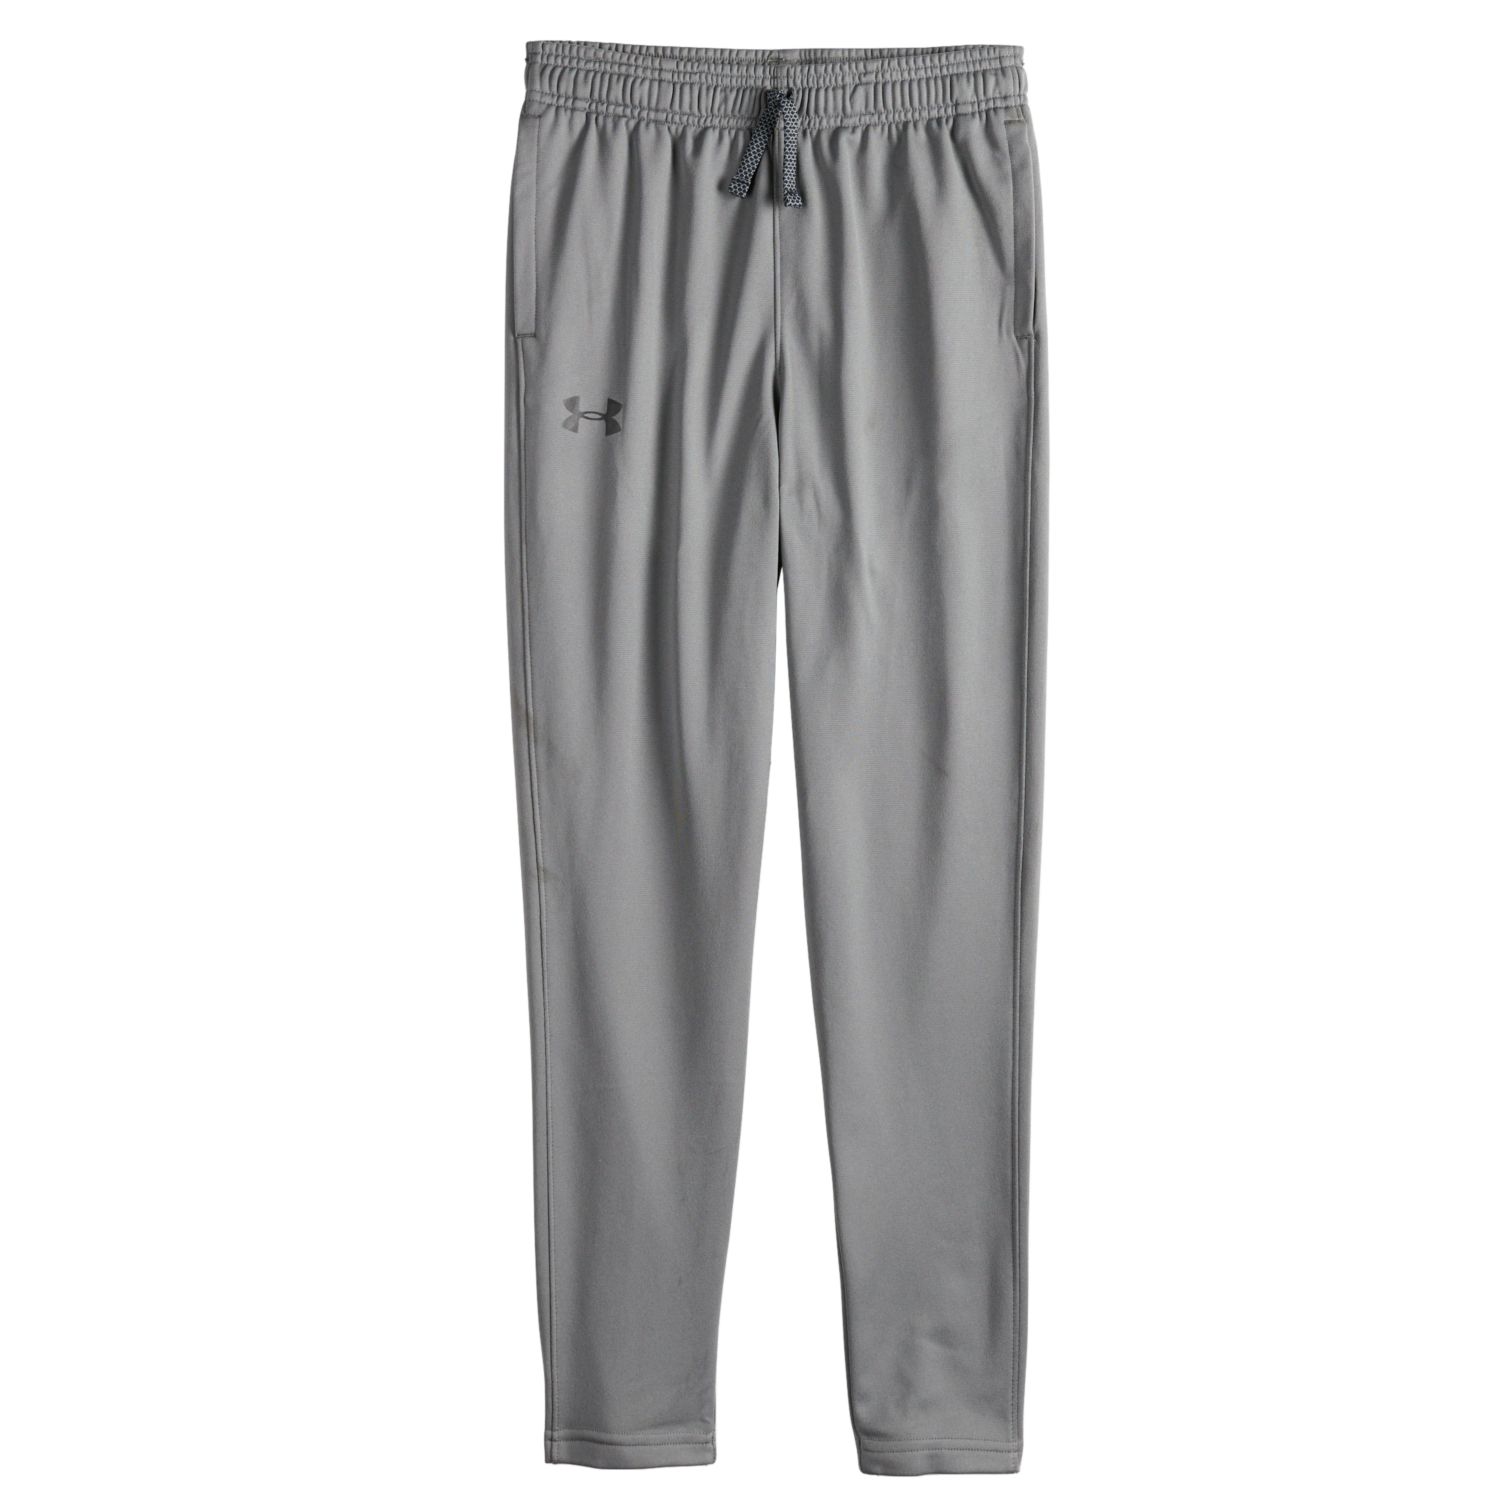 under armour brawler tapered pants